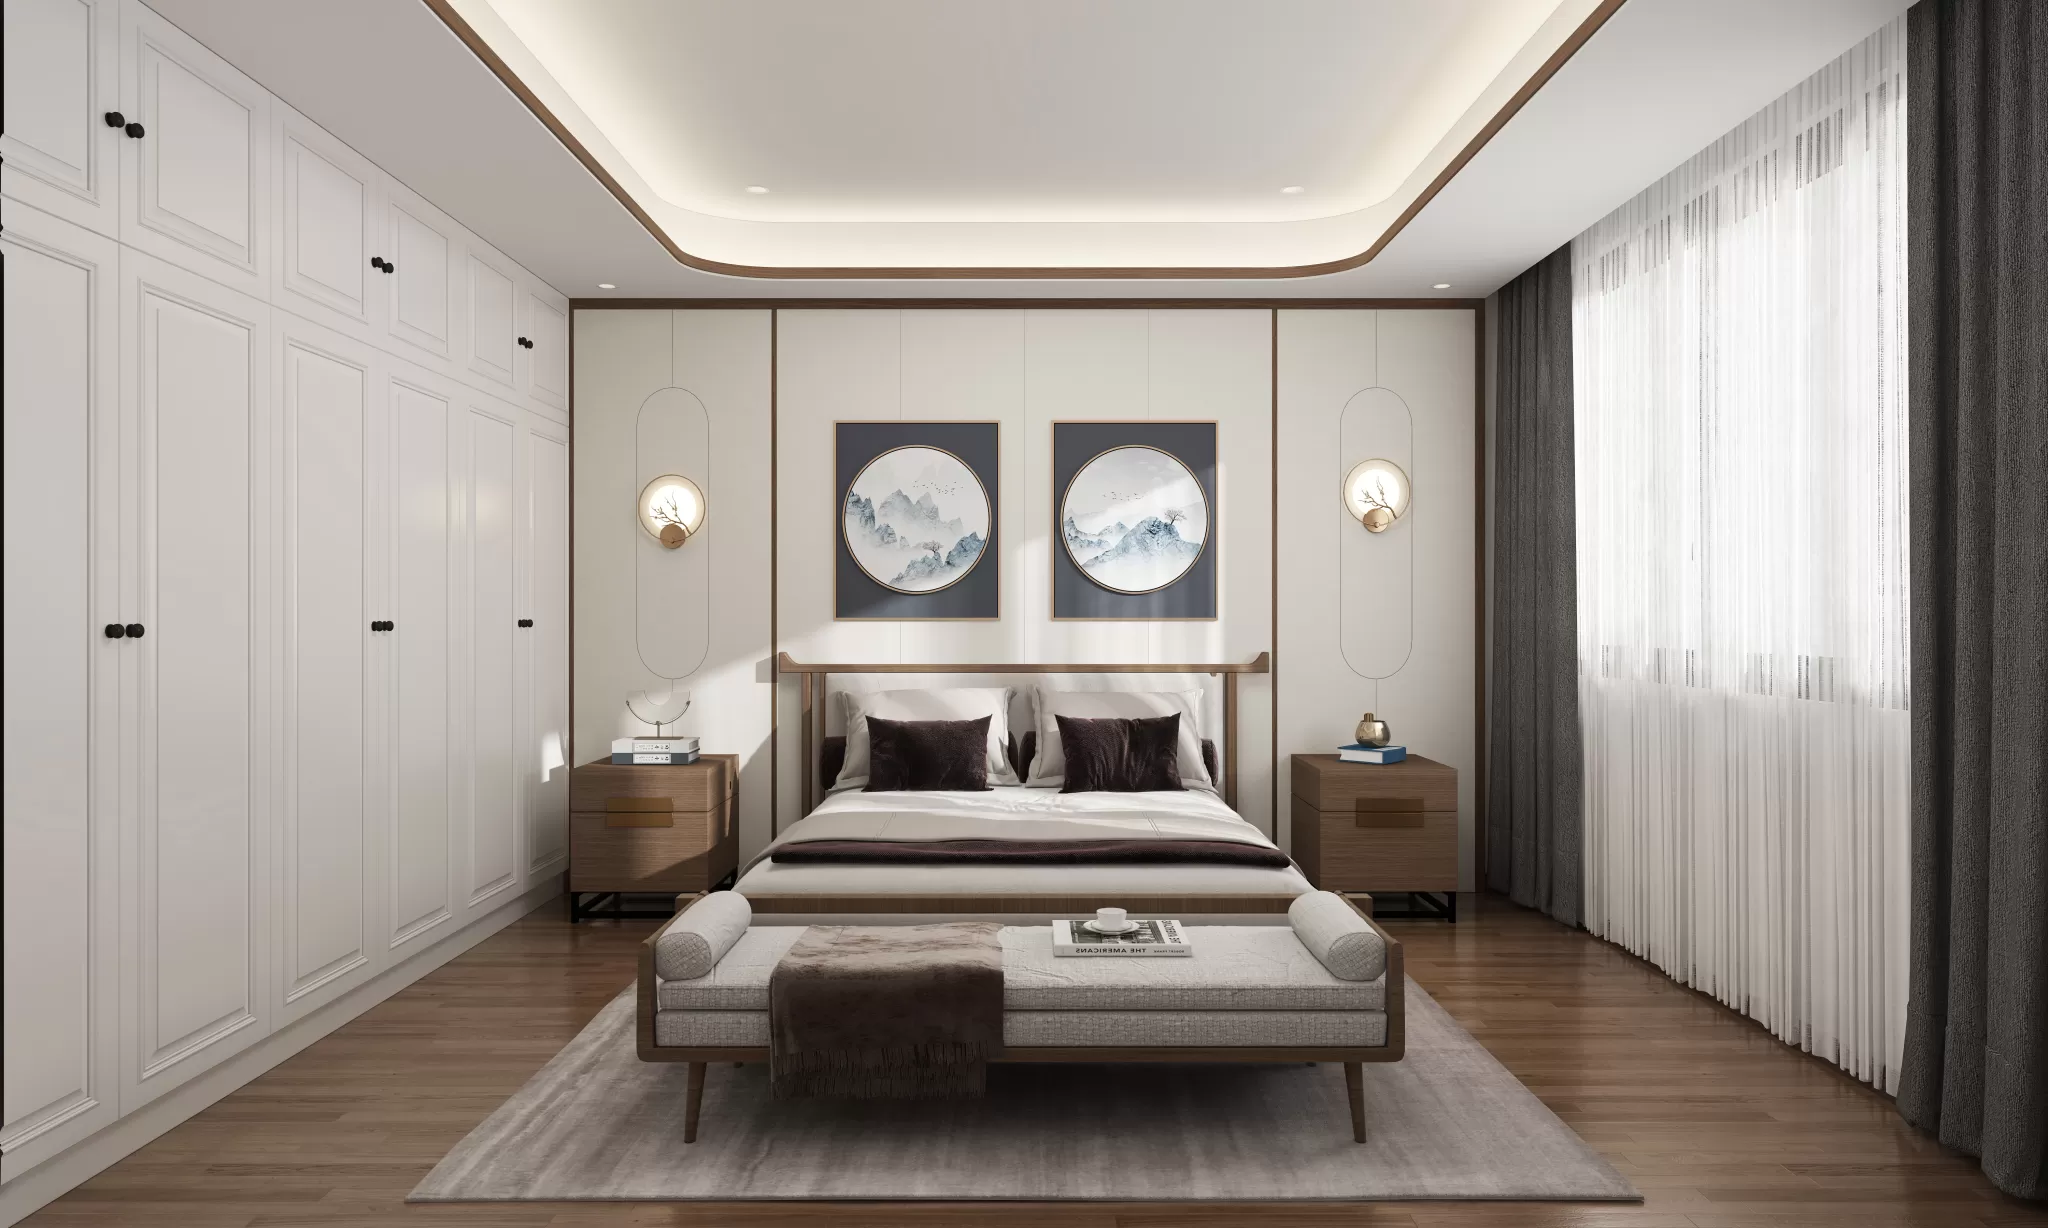 DESMOD INTERIOR 2021 (VRAY)/5. BEDROOM – 2. CHINESE STYLES – 158